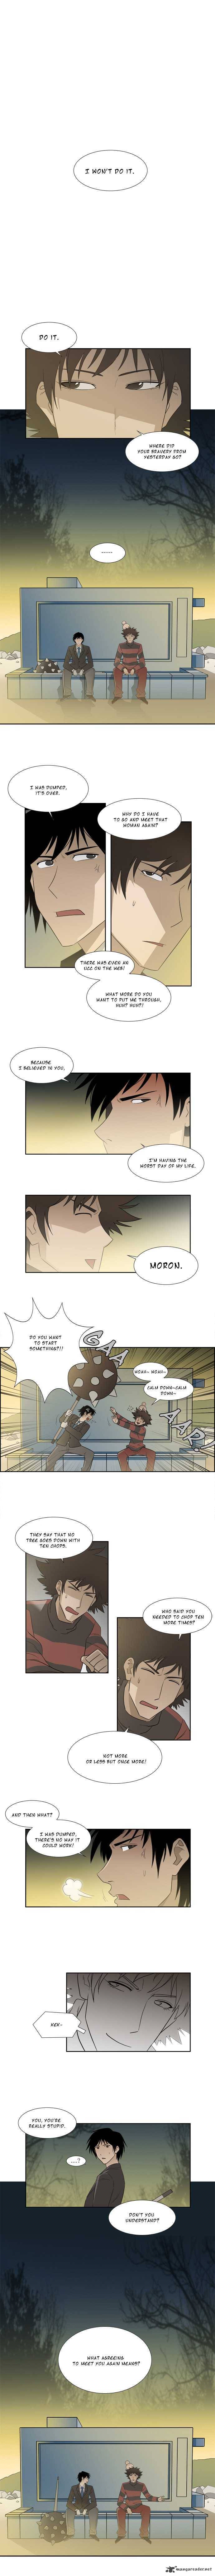 Melo Holic Chapter 11 Page 1